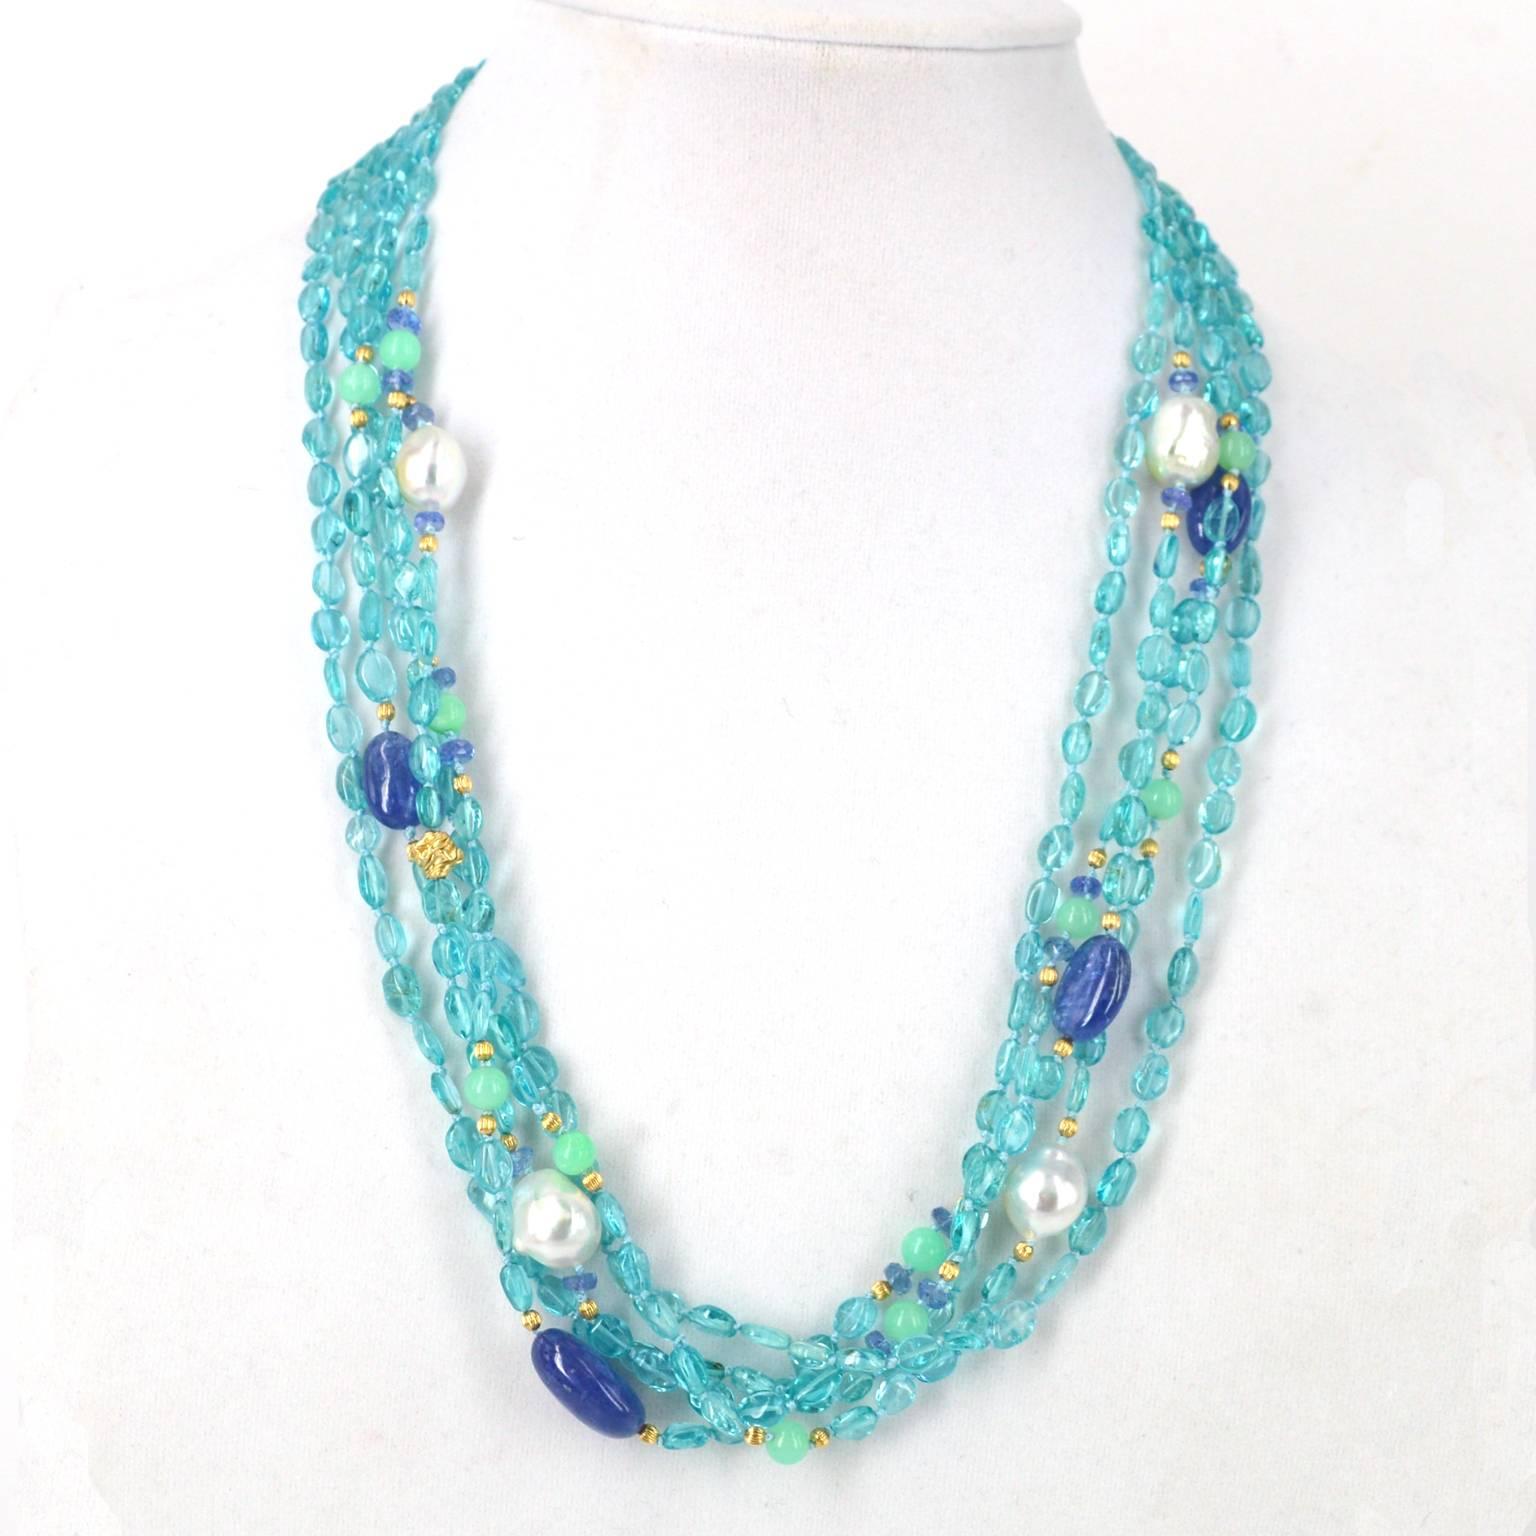 A sea of blue with 5 strands of Apatite highlighted by Tanzanite nuggets South Sea Pearls and Chrysoprase.
Tanzanite nuggets 14mm - 16mm
South Sea Pearls 14mm

Necklace measures 57cm hand knotted with a vermeil magnetic clasp

All stones and pearls